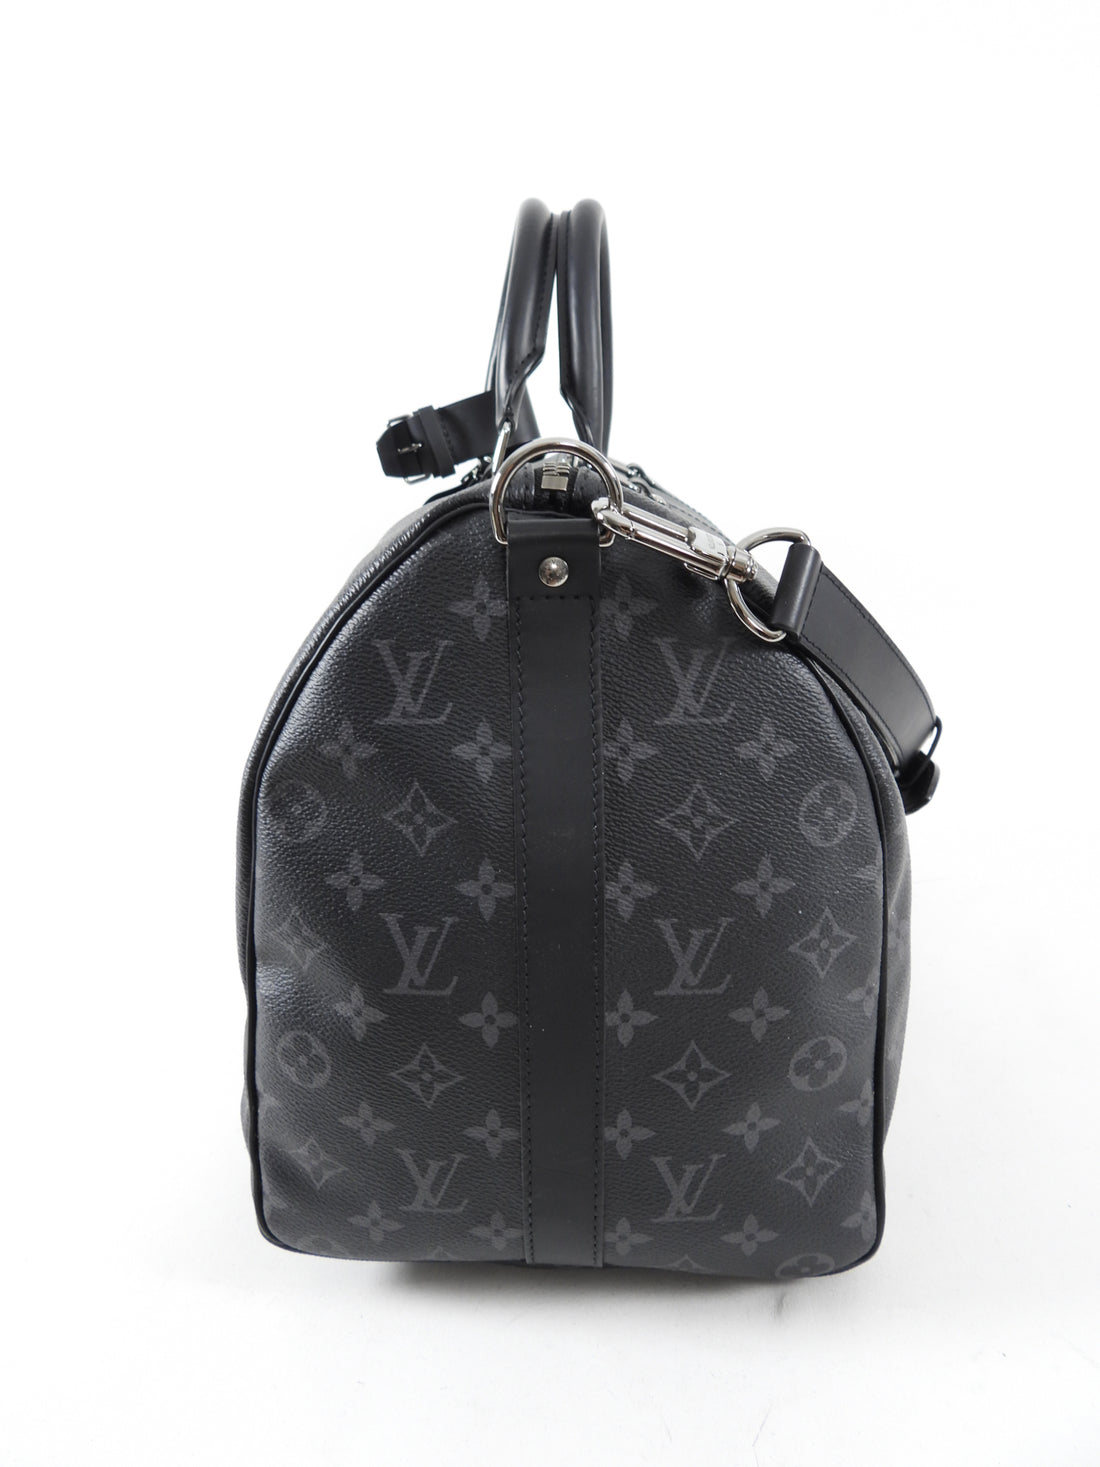 Louis Vuitton Monogram Keepall Bandouliere 45 Duffle Bag with Strap 1122lv11